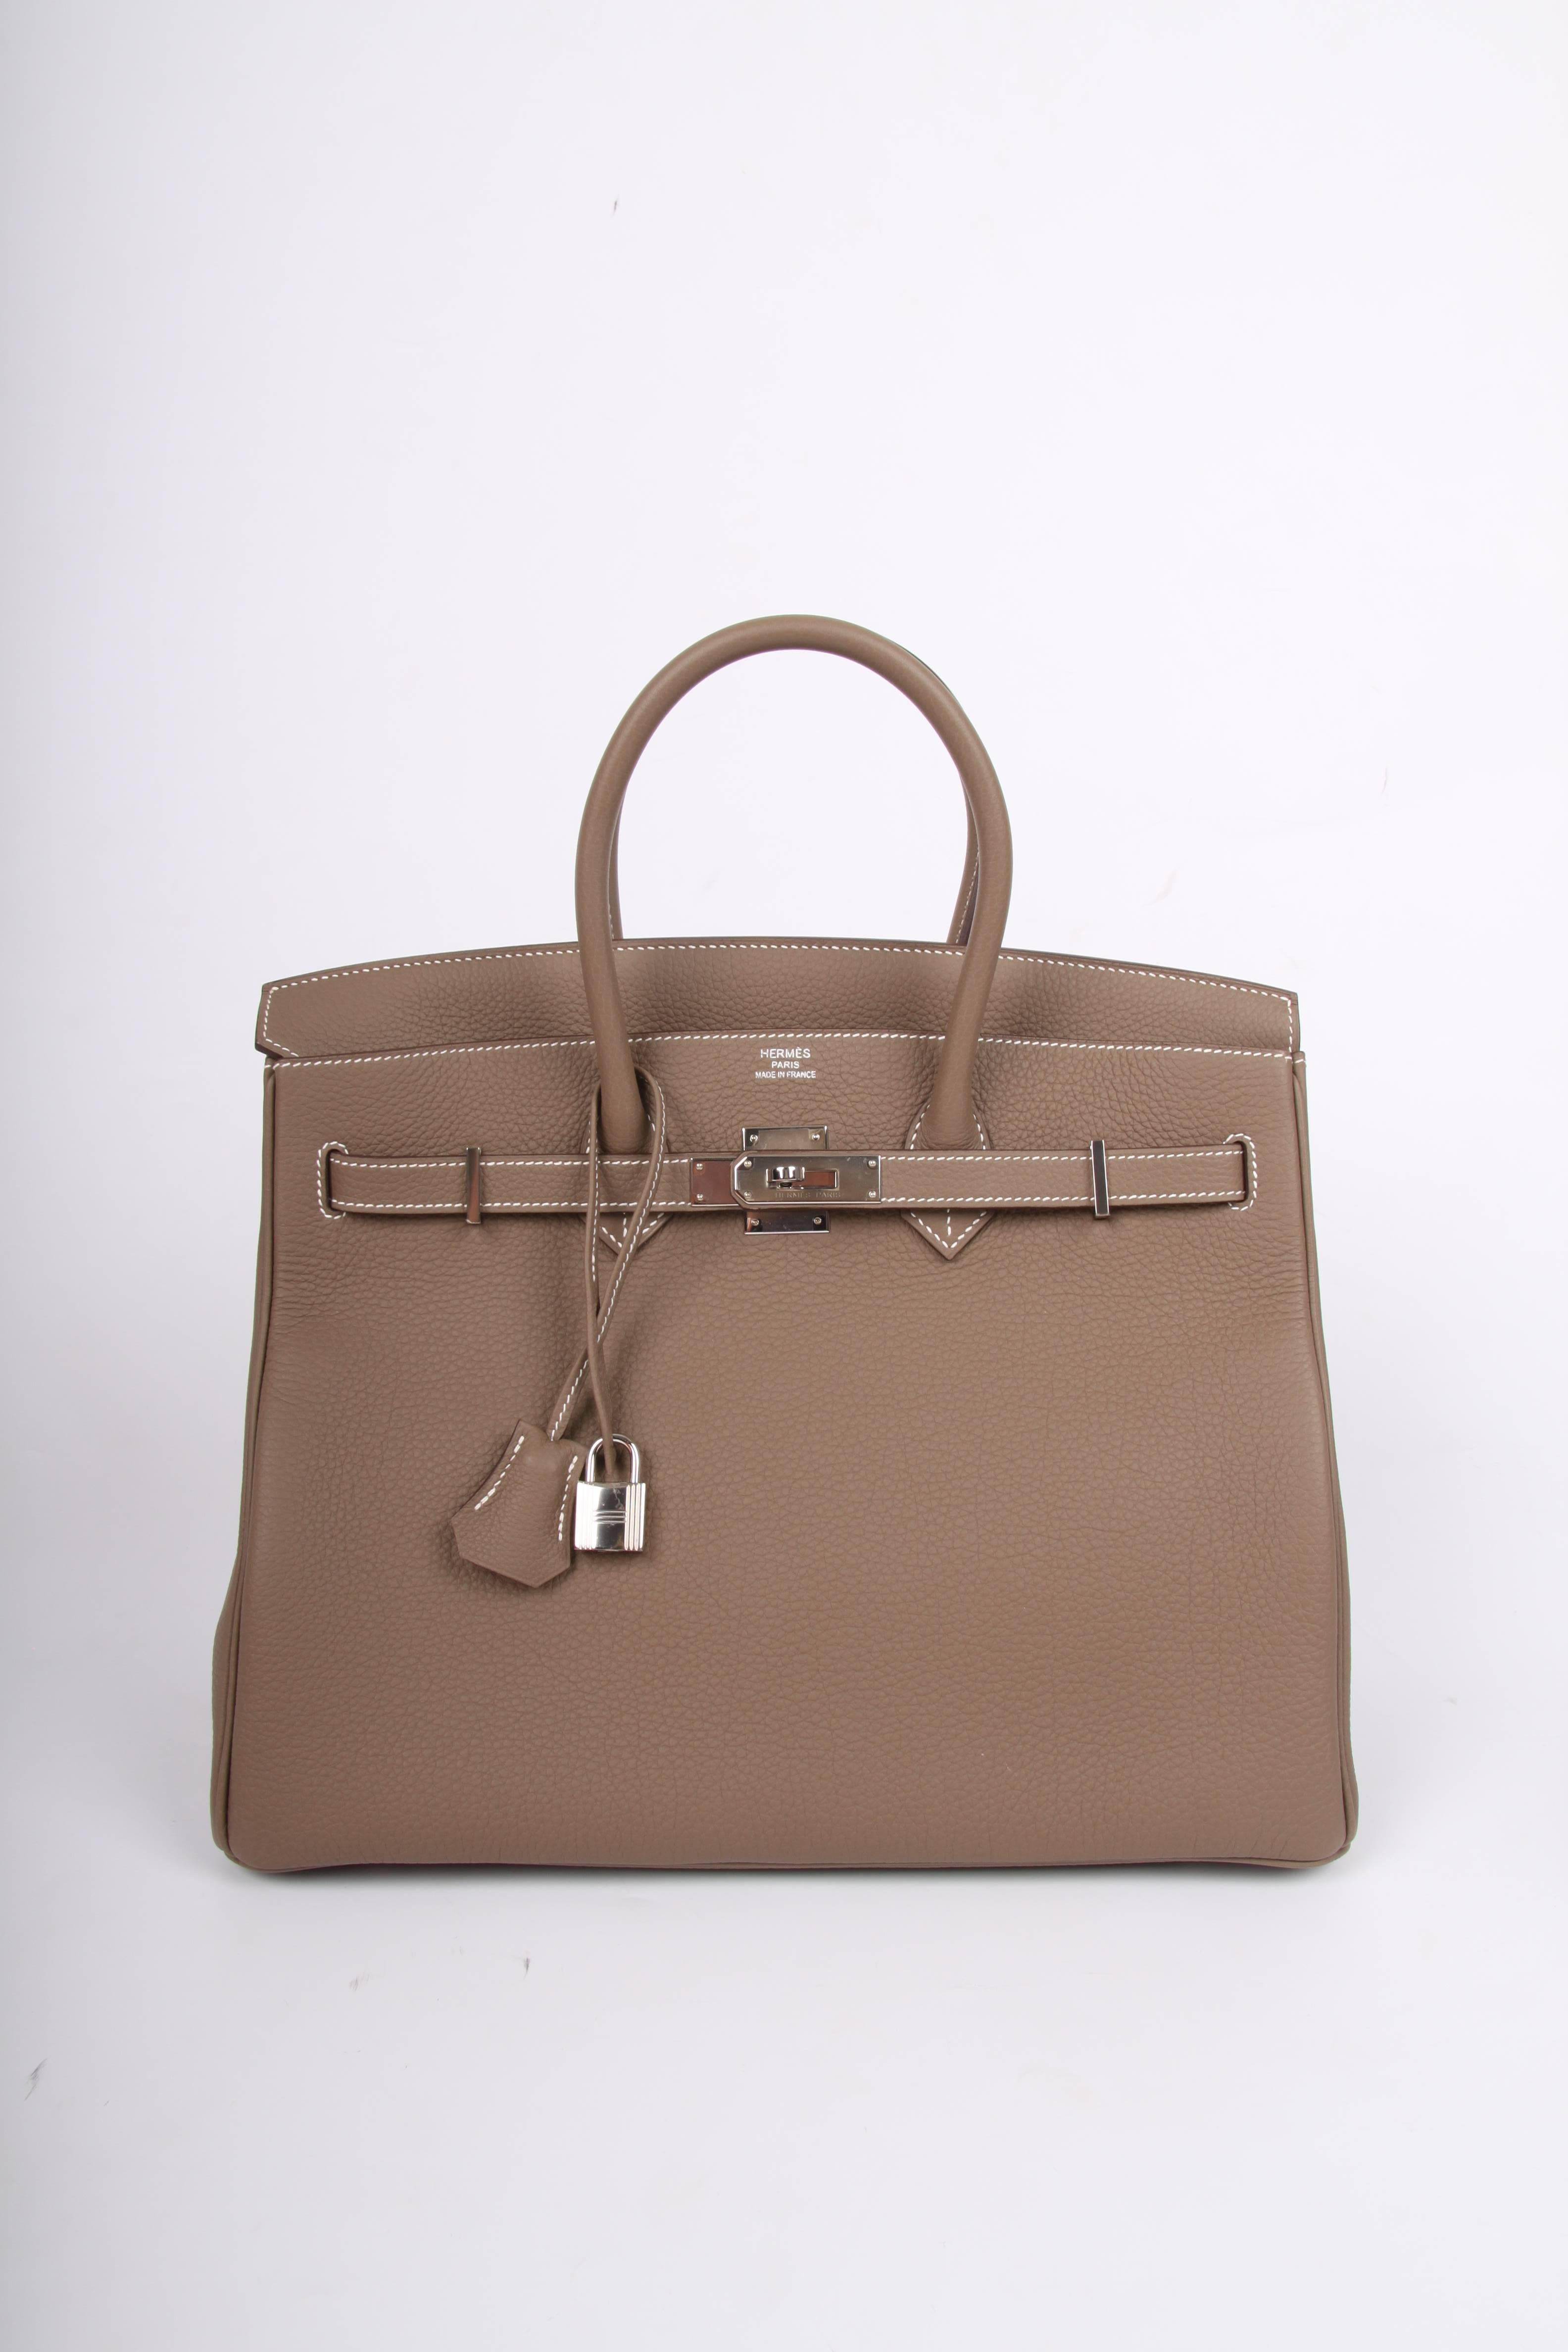 Hermès Birkin Bag 35 in Togo leather with silvertone hardware, this color is named Étoupe. A shade of taupe at its very best!

Front toggle closure, clochette with lock and two keys, and double rolled handles. The Togo leather has a visible grain,